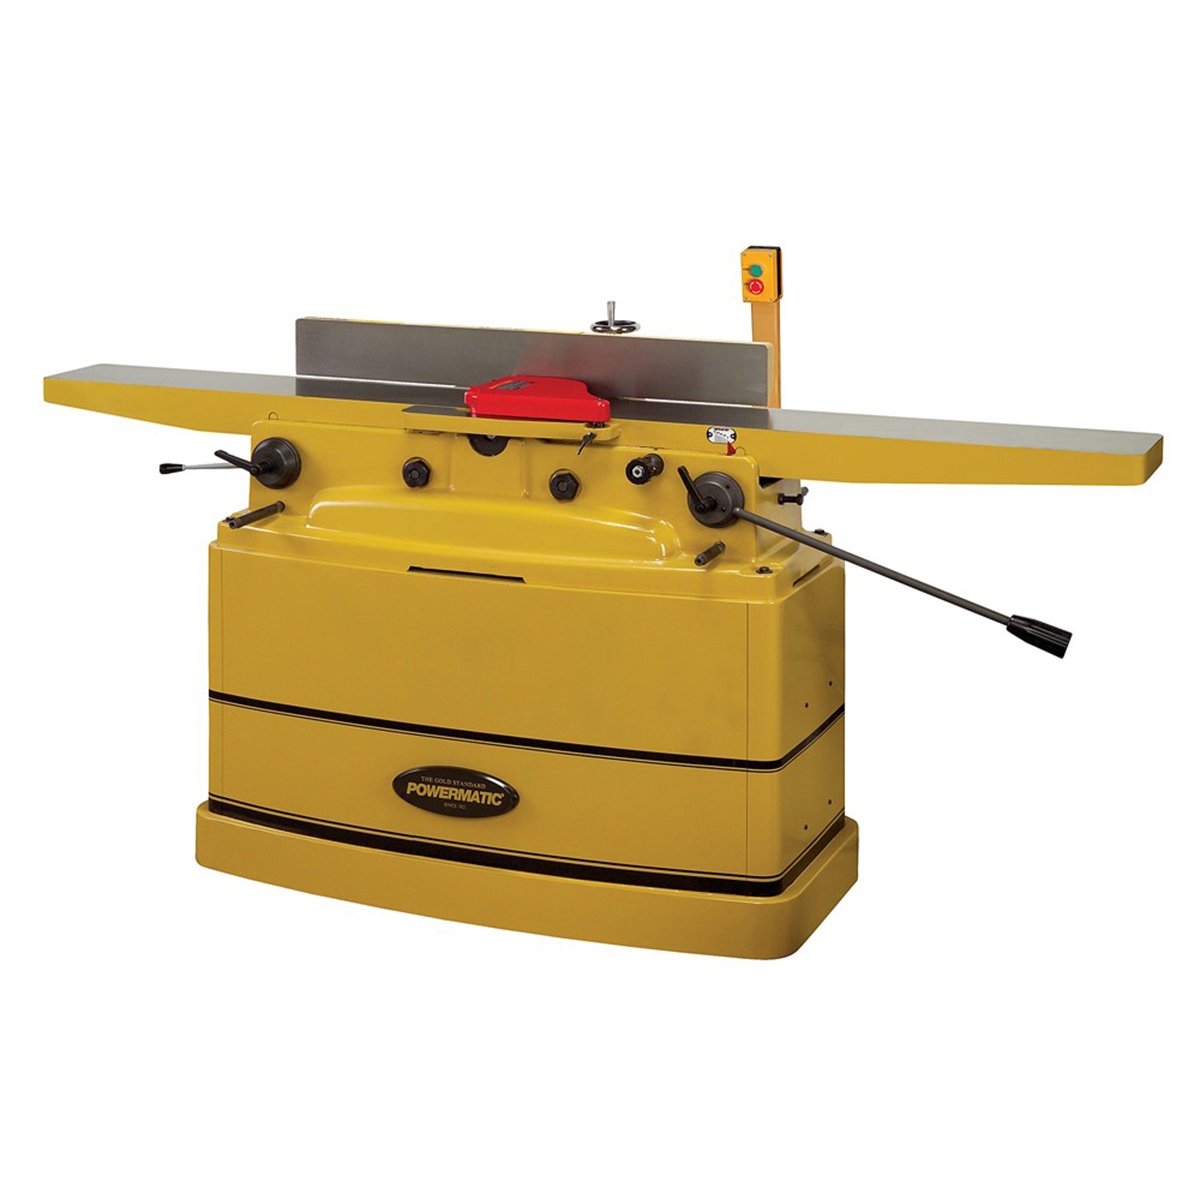 PJ-882 or PJ-882HH 8" Parallelogram Jointer, 2HP 1PH 230V - 2 Options to choose from - Ultimate Tools